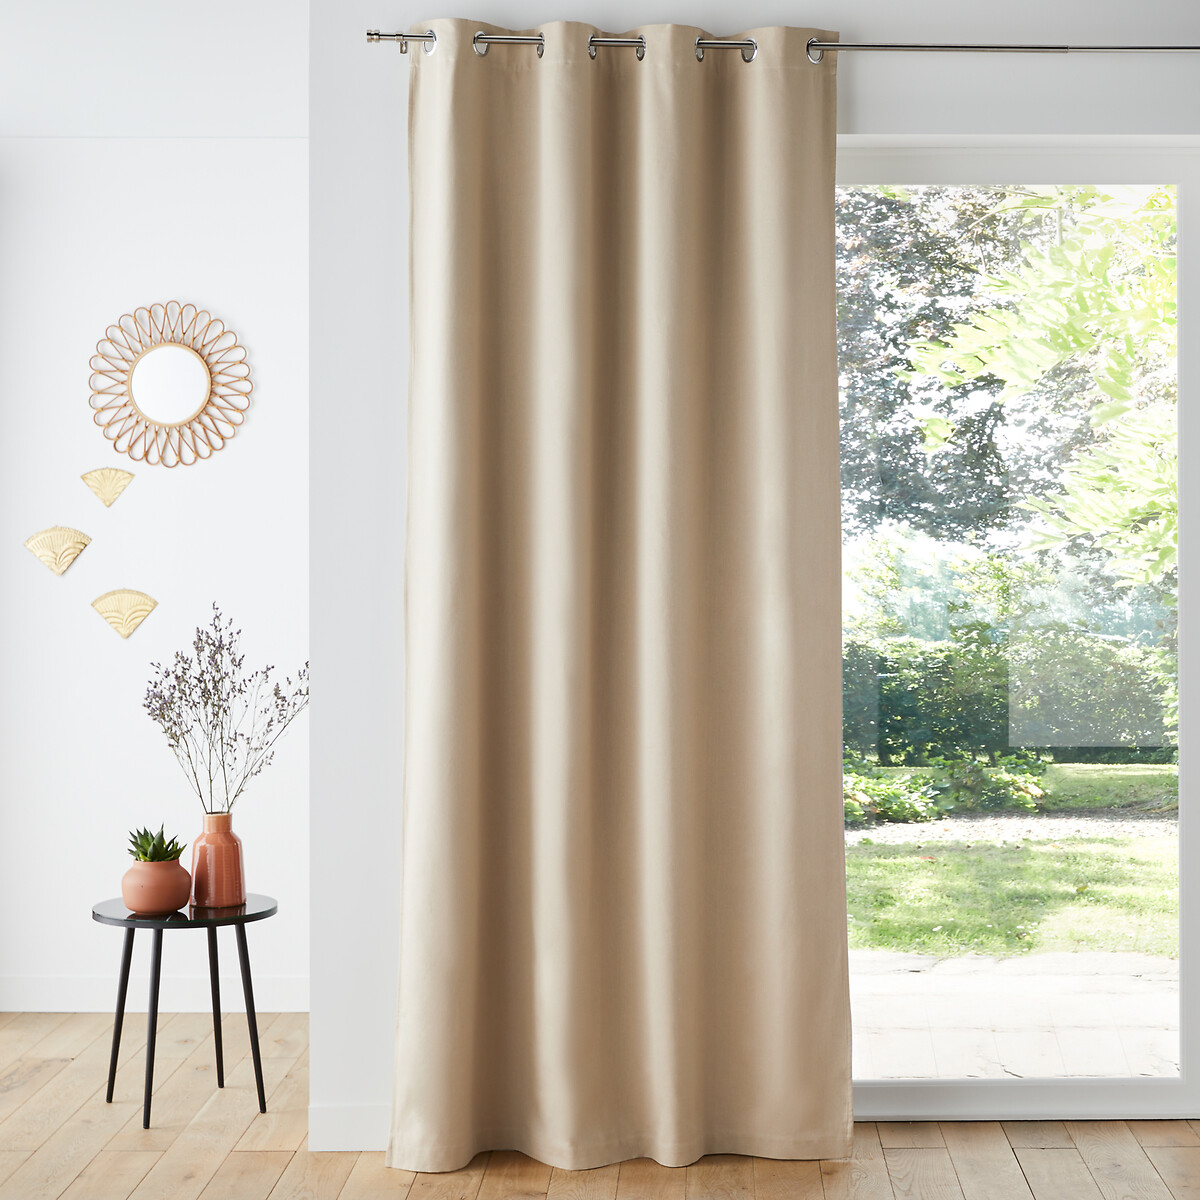 Taima Linen/Cotton Single Lined Curtain with Eyelets